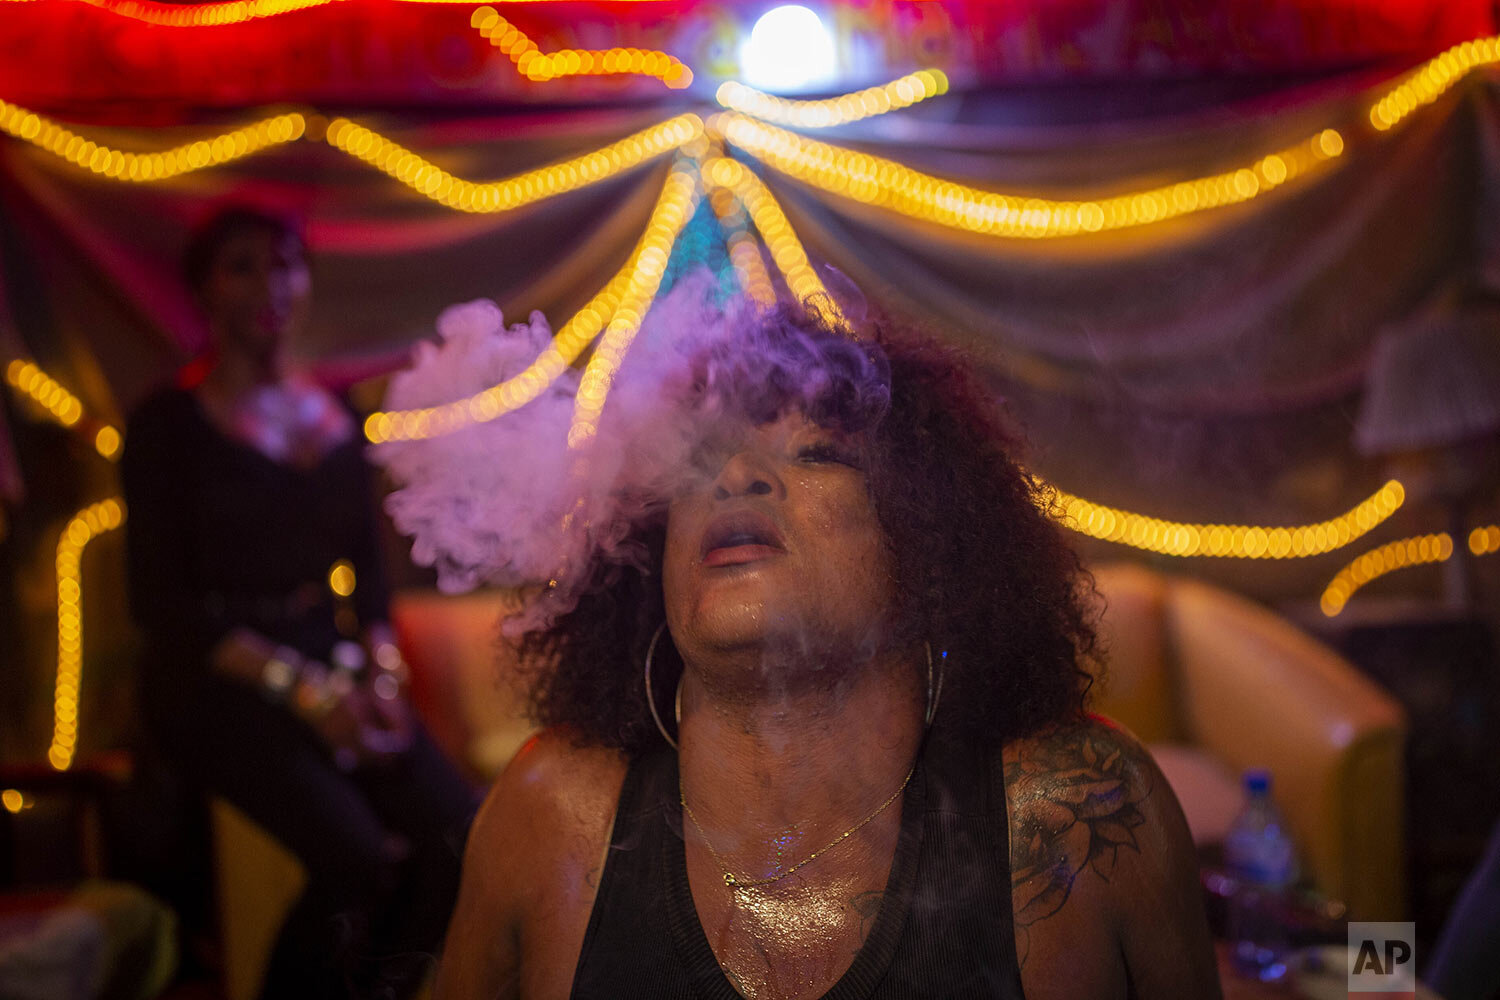  Transgender Laurent Voltus exhales cigarette smoke while dancing with friends at a club in Port-au-Prince, Haiti, Aug. 18, 2020. Voltus lives at the Kay Trans Haiti Center located in an area where residents can bring their partners, go out to clubs,